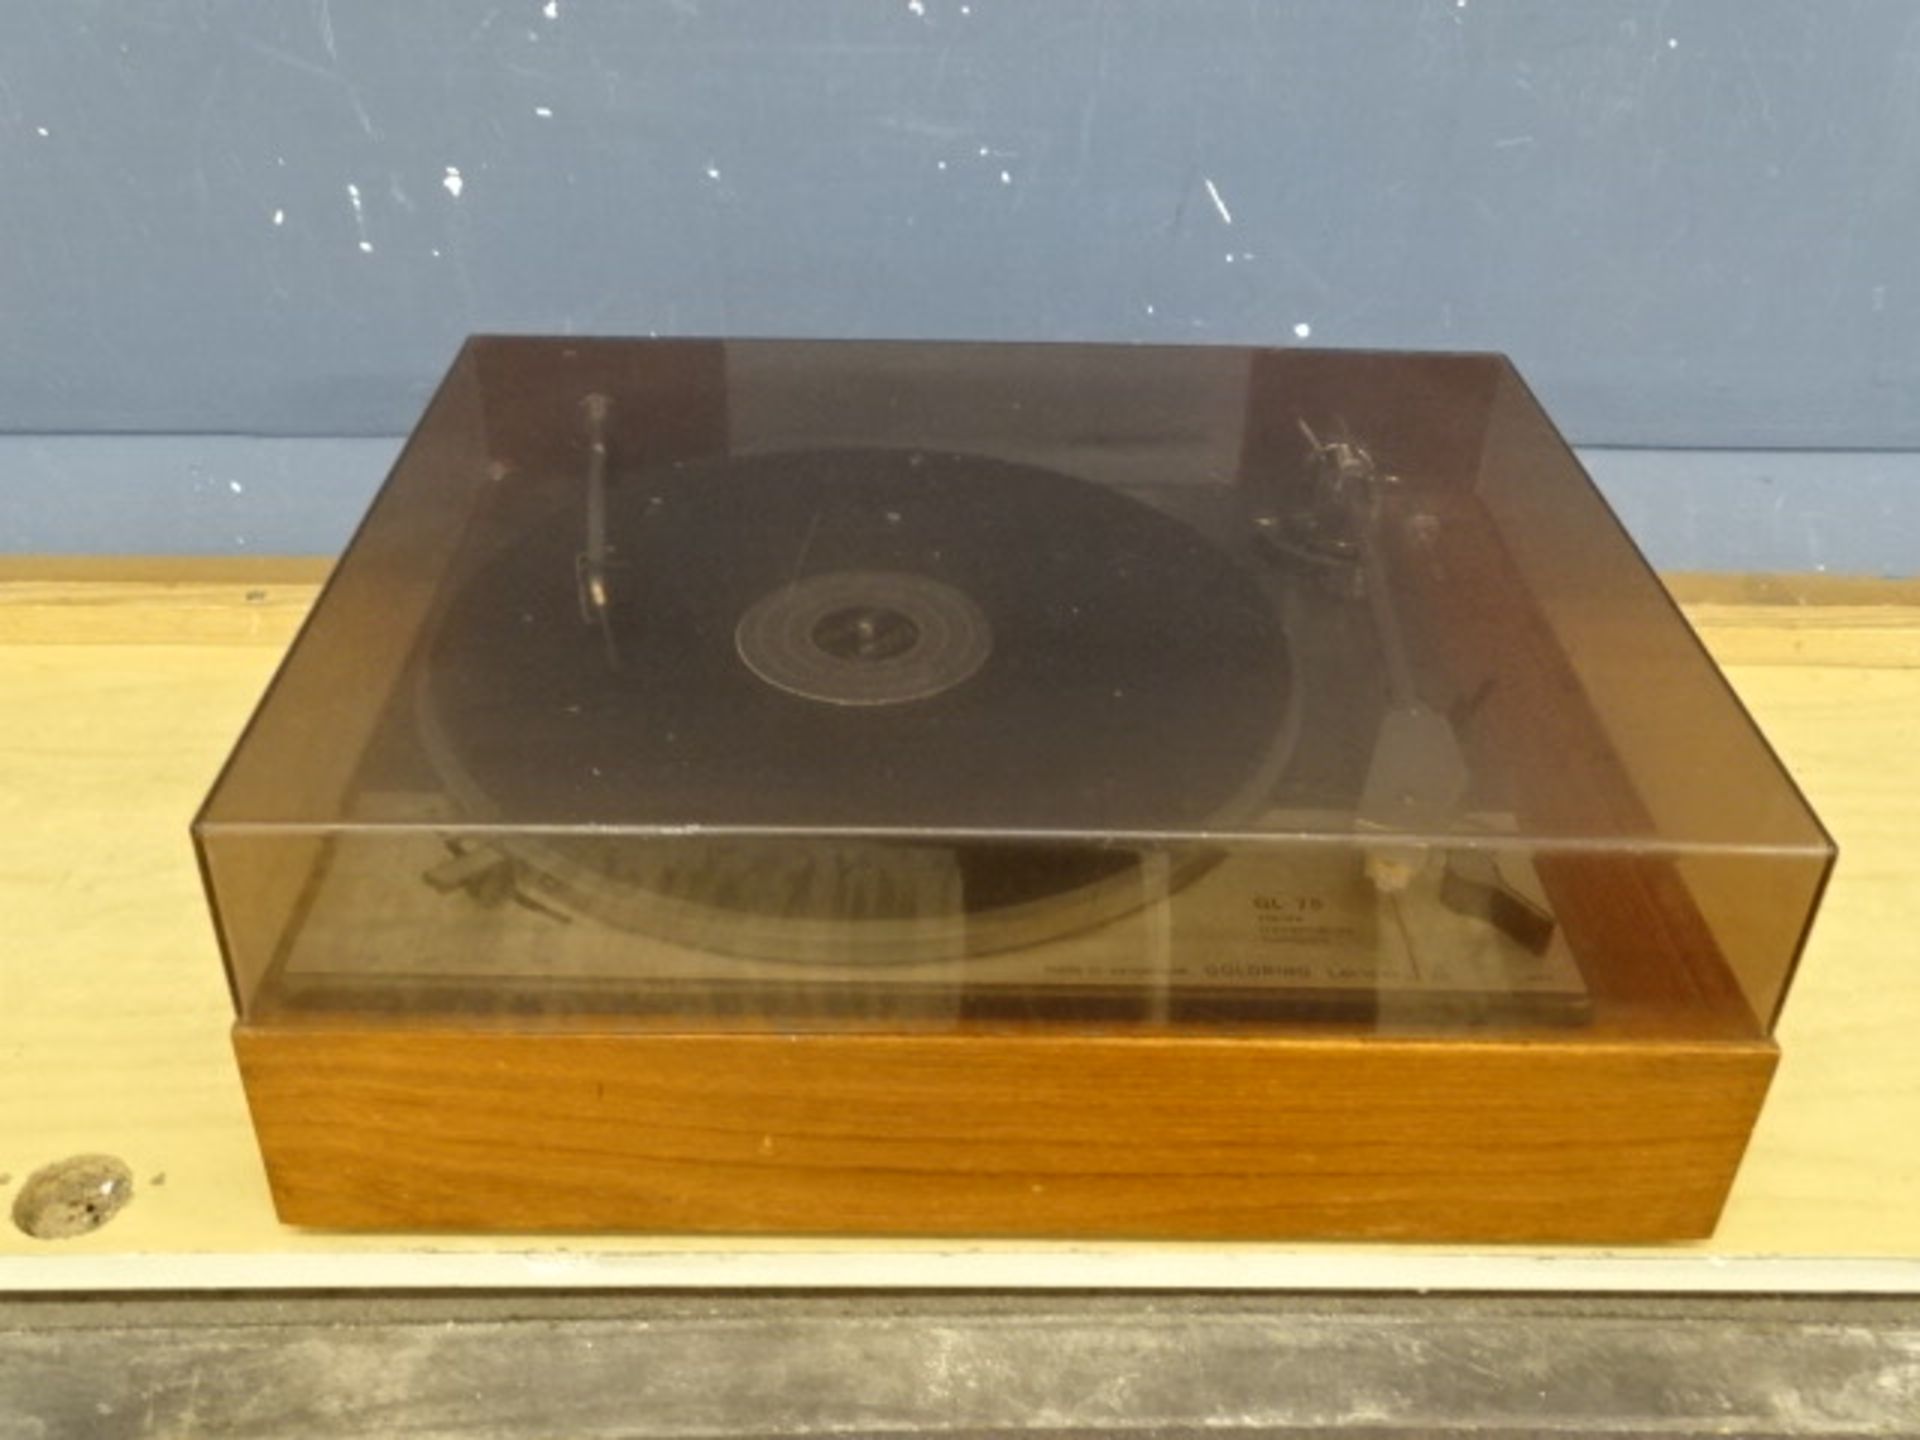 Vintage Goldring Lenco GL 75 stereo transcription turntable from a house clearance - Image 3 of 3